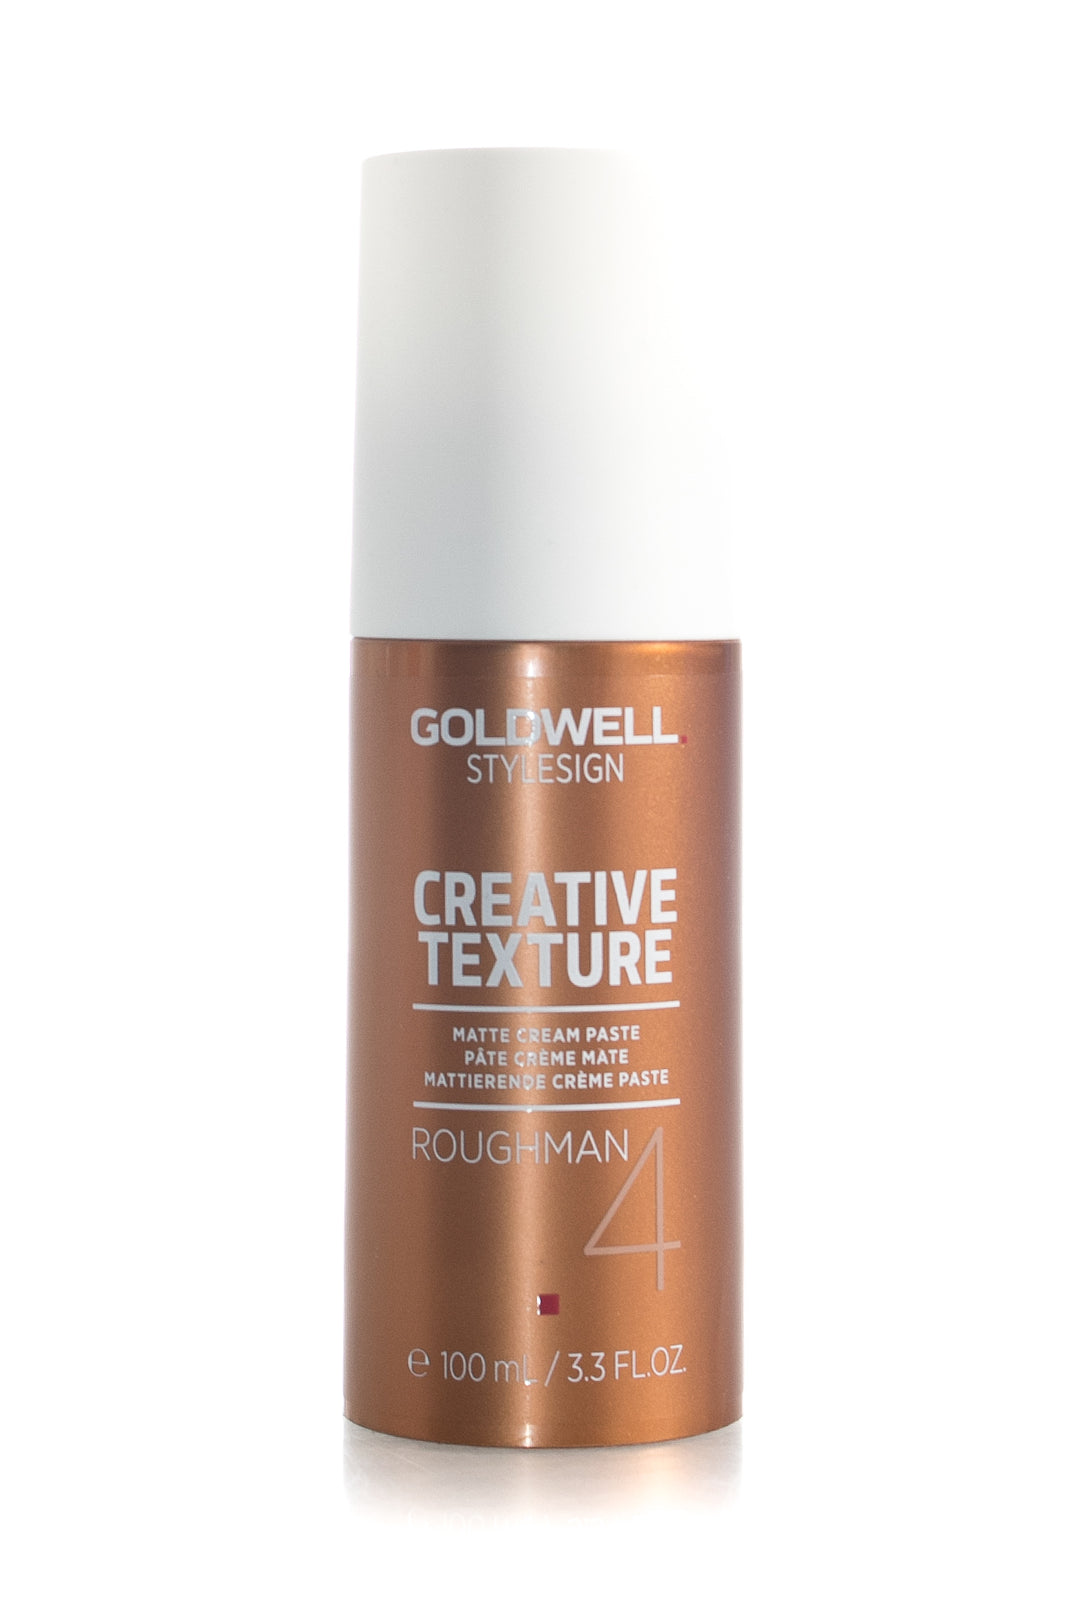 Product Image: Goldwell Creative Texture Roughman - 100ml